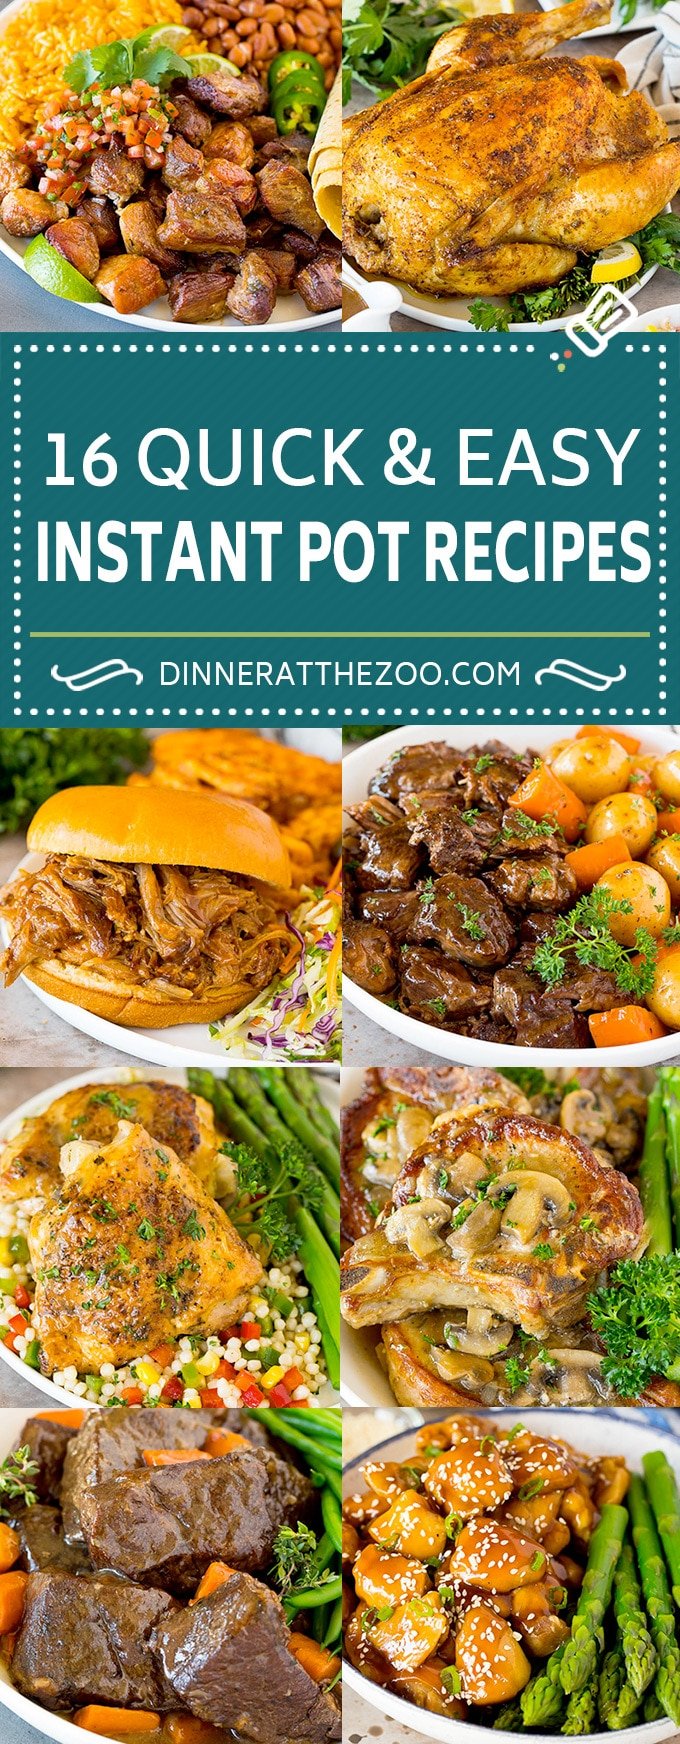 16 Instant Pot Recipes - Dinner at the Zoo